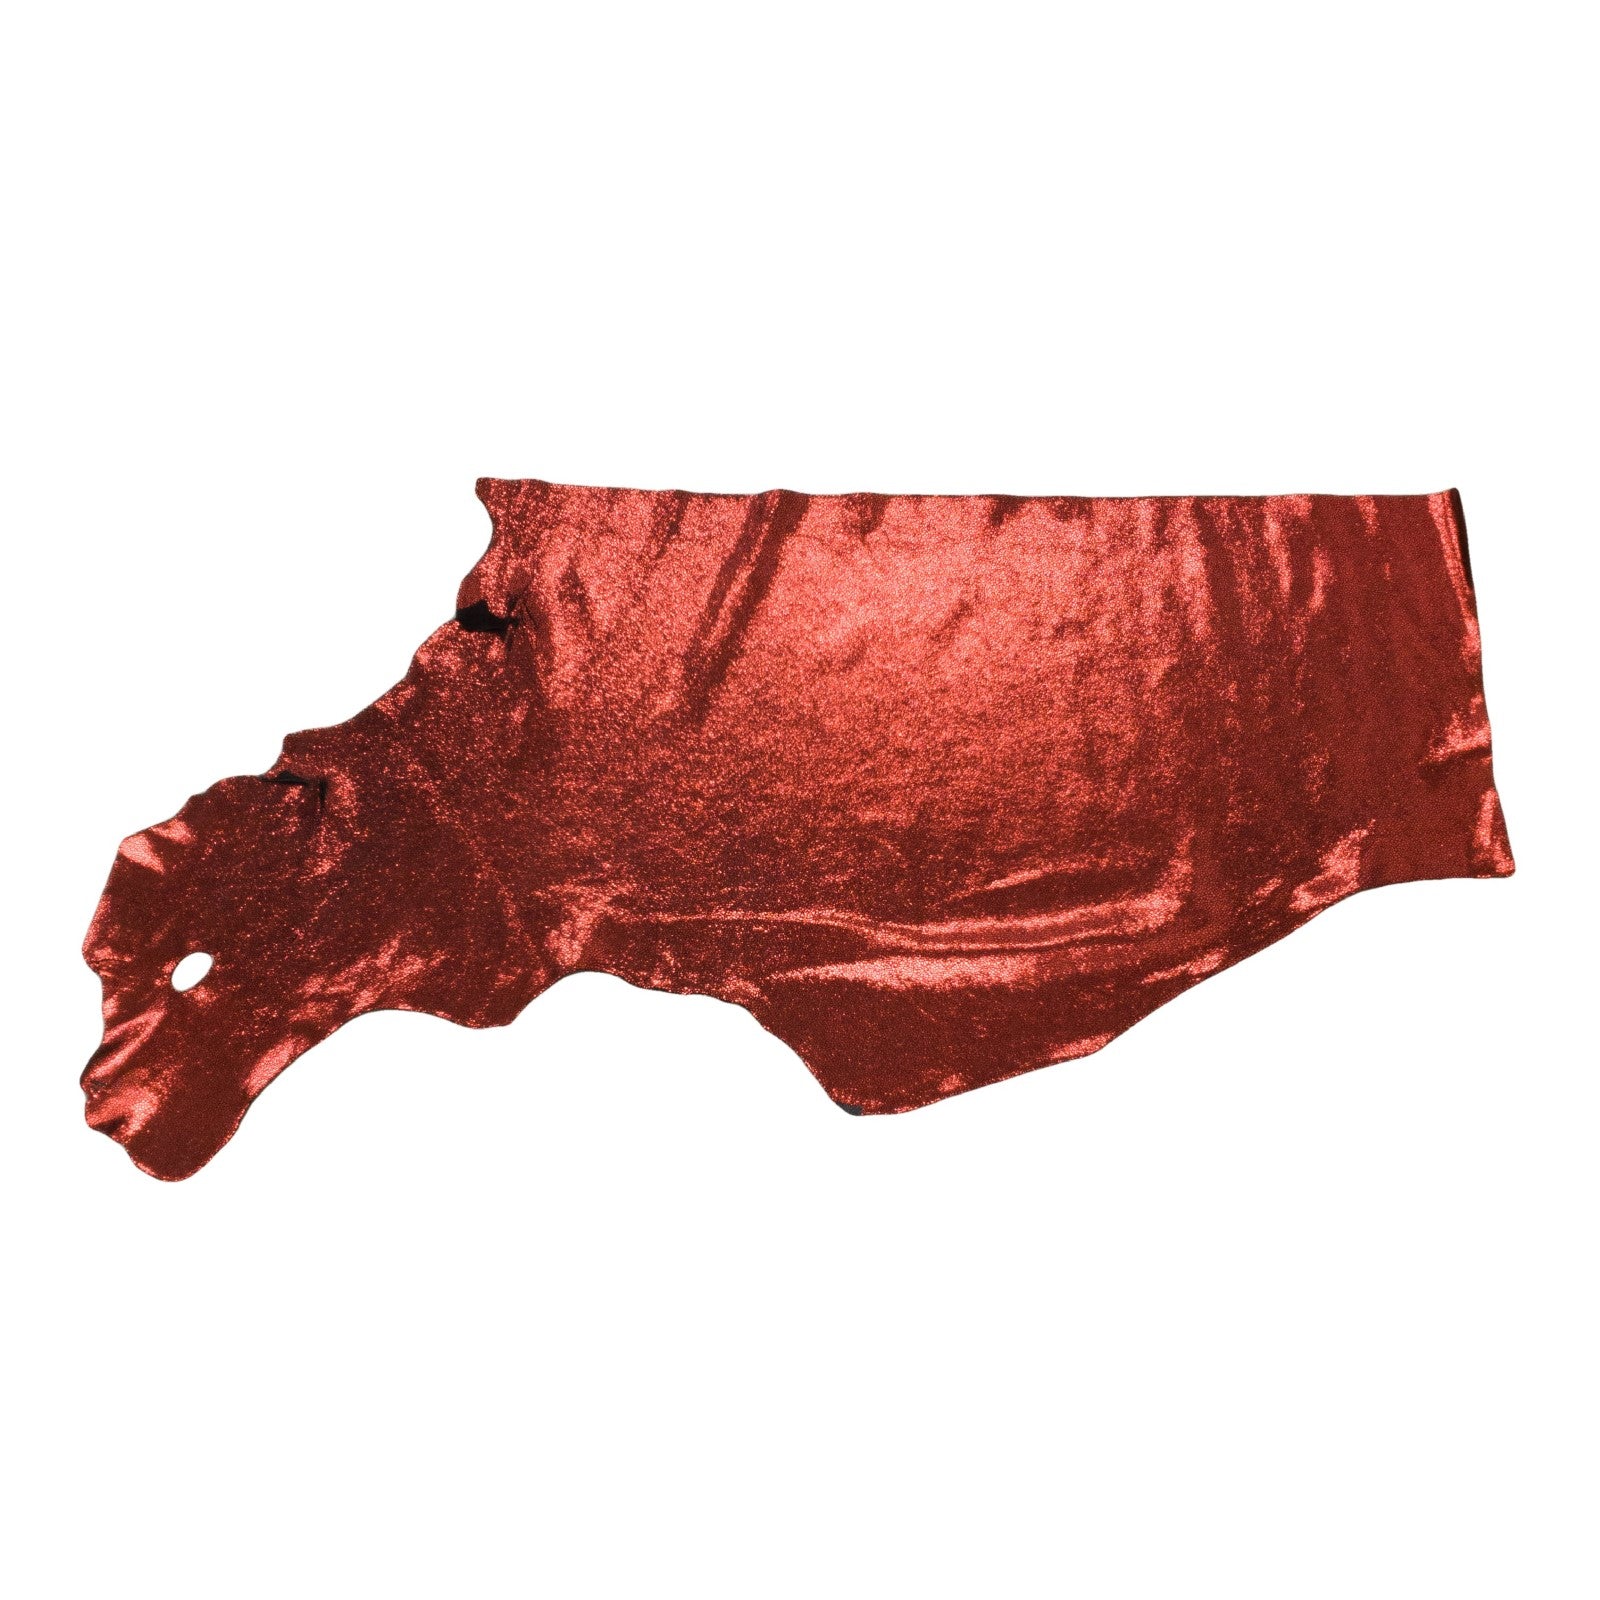 Metallic Red Sizzling Stingray 2-3 oz Cow Hides, Bottom Piece / 6.5-7.5 Sq Ft | The Leather Guy